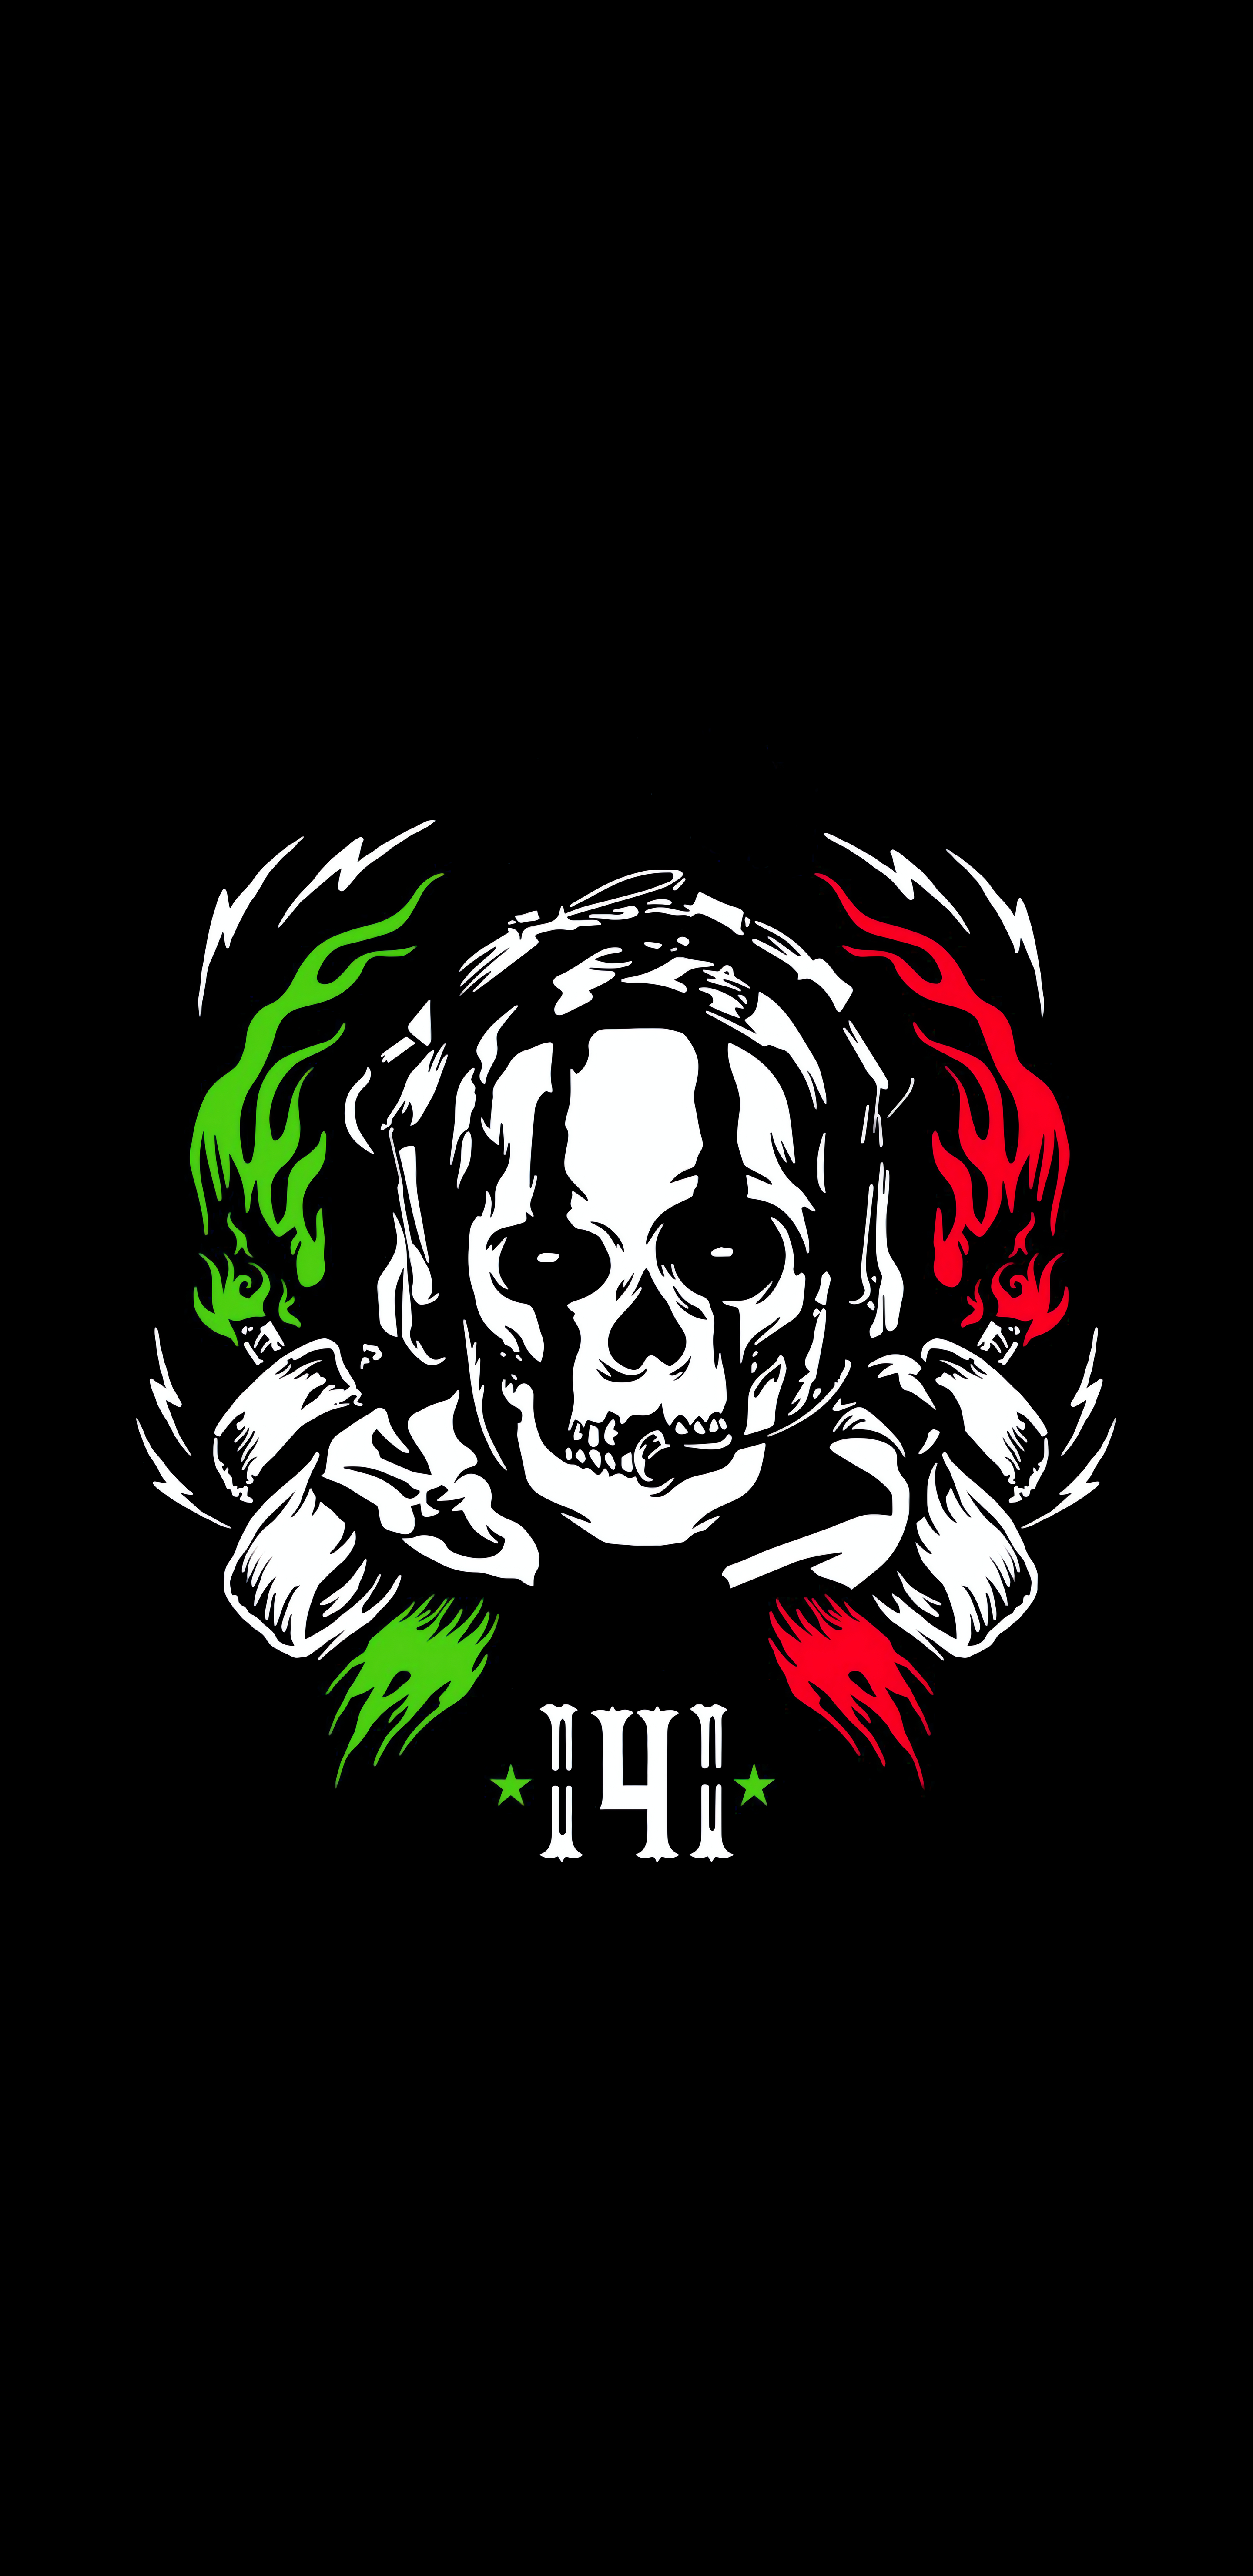 Call Of Duty Ghost Mexico Skull Vertical Black Background Simple Background Minimalism Logo 2880x5920